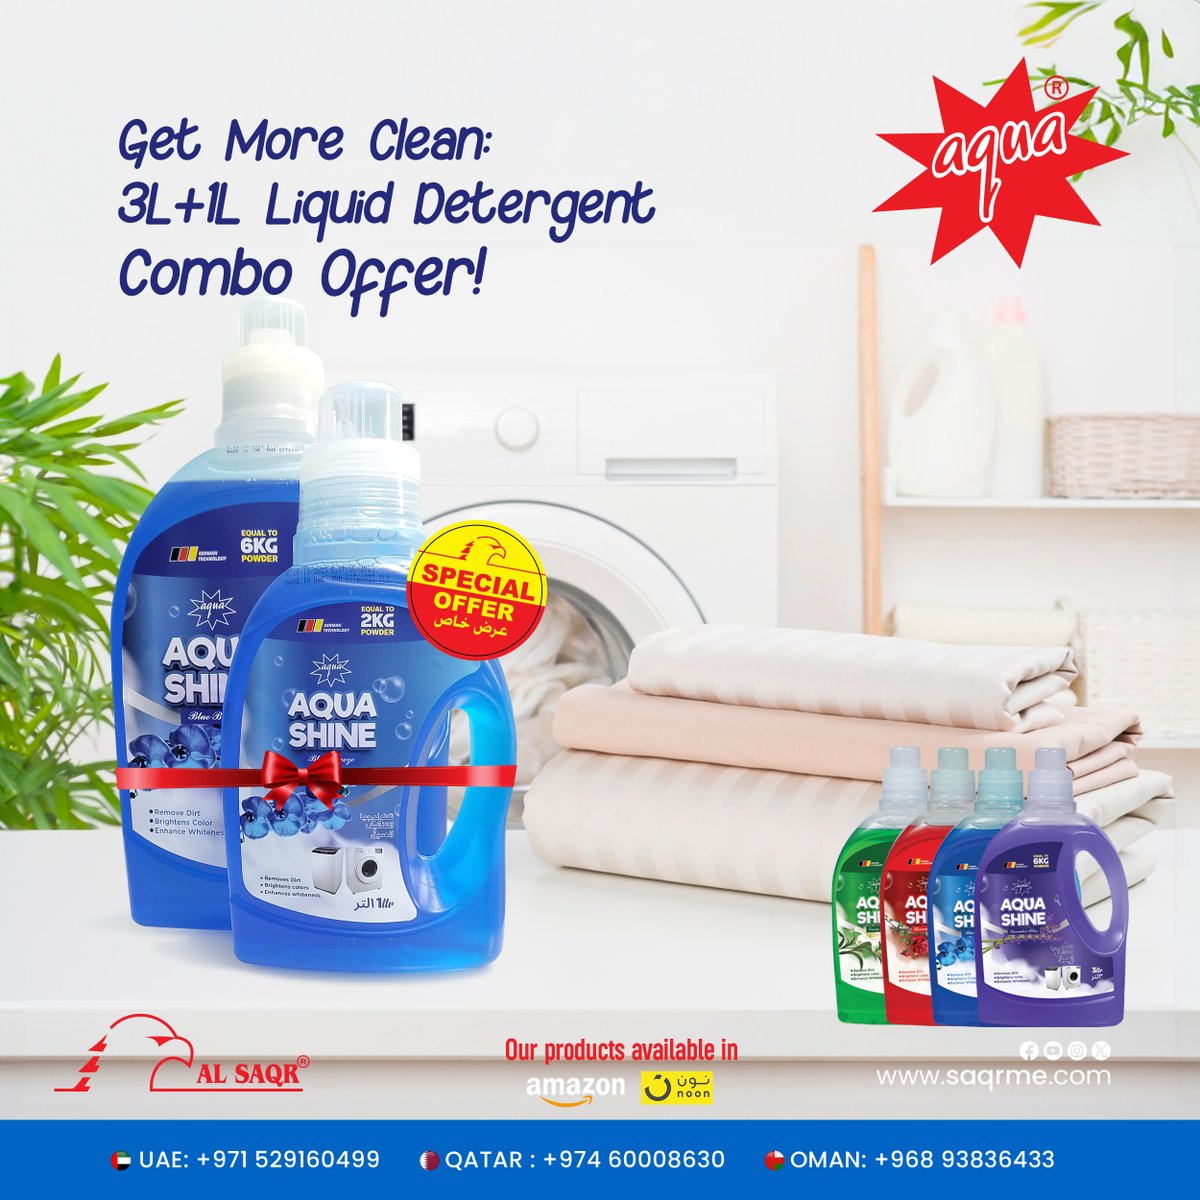 Indulge in the luxury of ultra-soft laundry with our amazing Aqua Shine liquid detergent offers! 🌸👖 Imagine clothes that not only feel velvety soft but also exude a fresh, delightful scent all day long.#LiquidLaundry #DetergentPower #CleanClothes #EcoFriendlyClean #LaundryDay